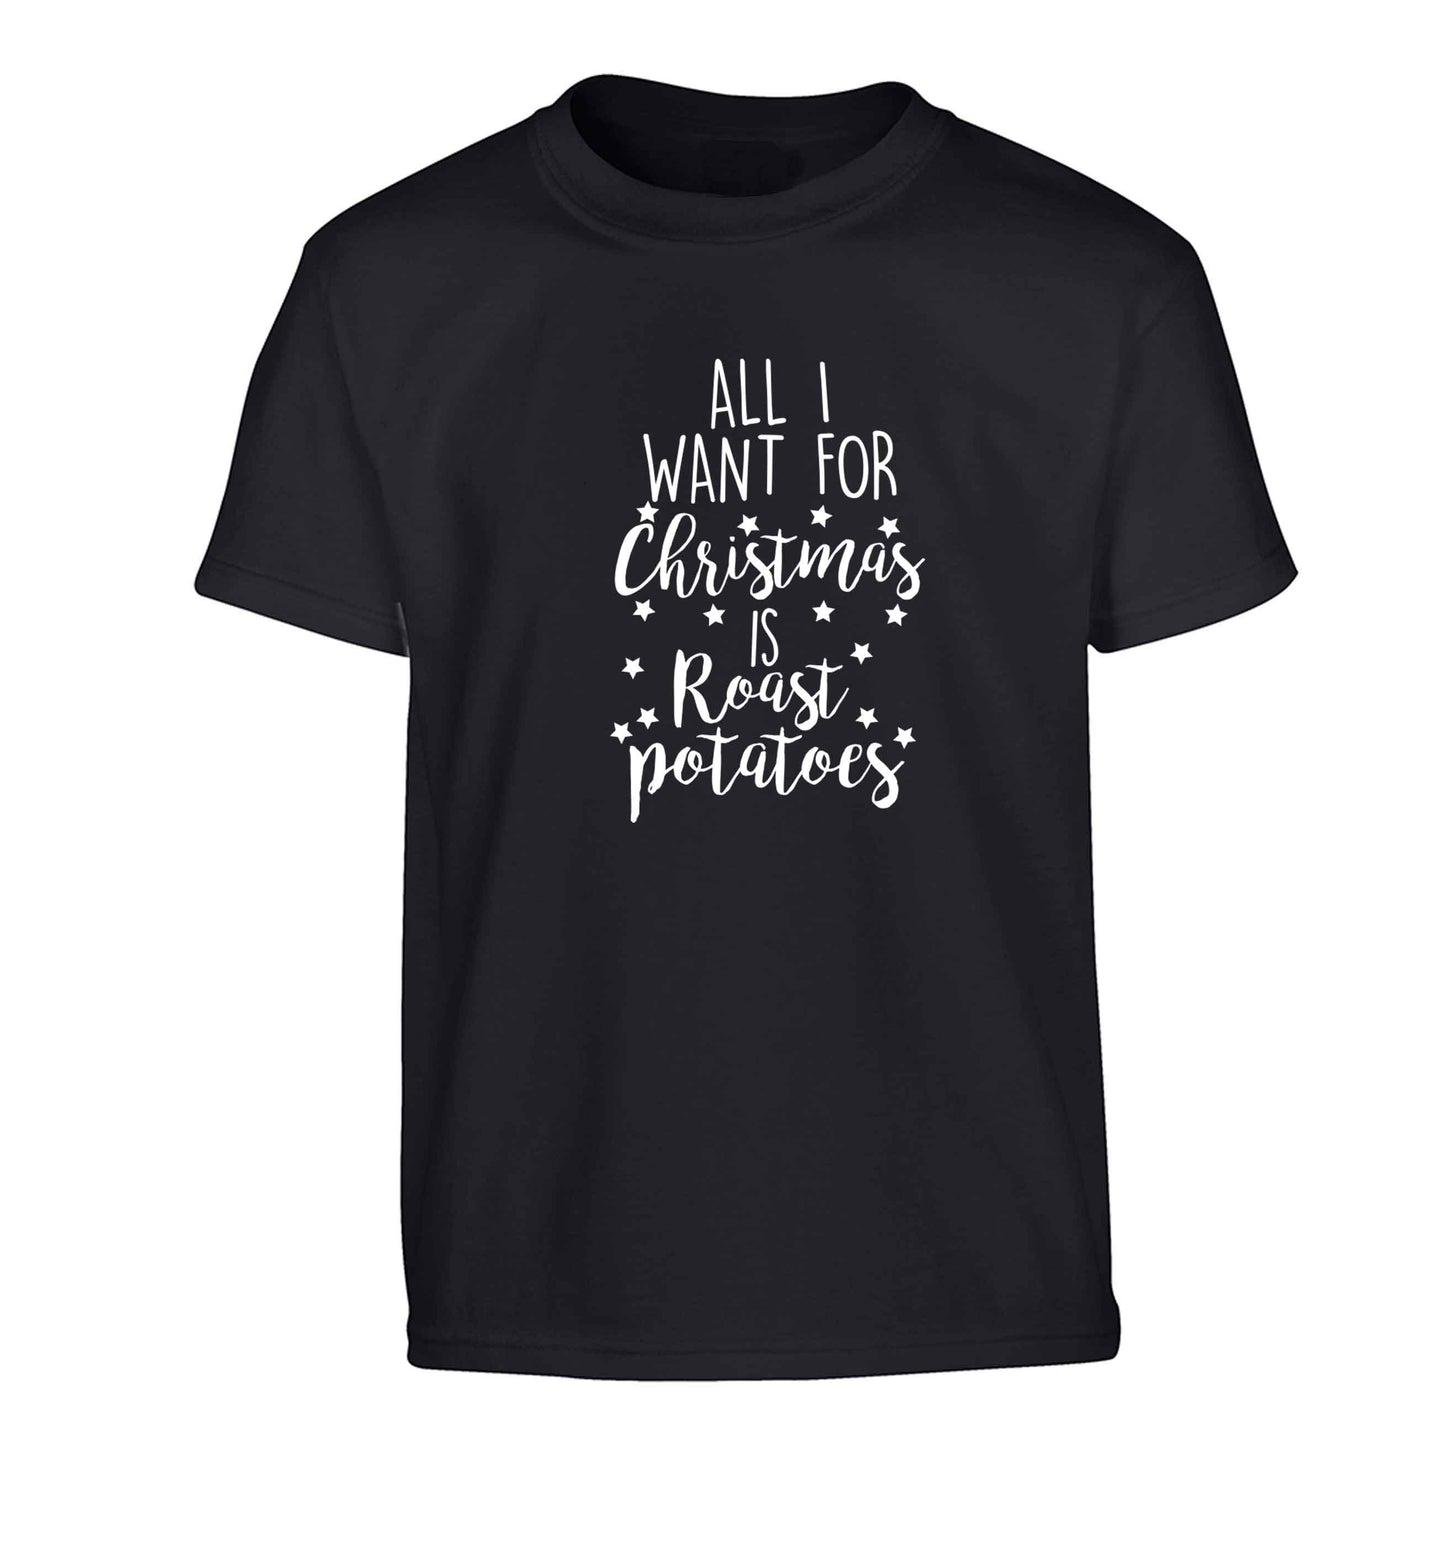 All I want for Christmas is roast potatoes Children's black Tshirt 12-13 Years